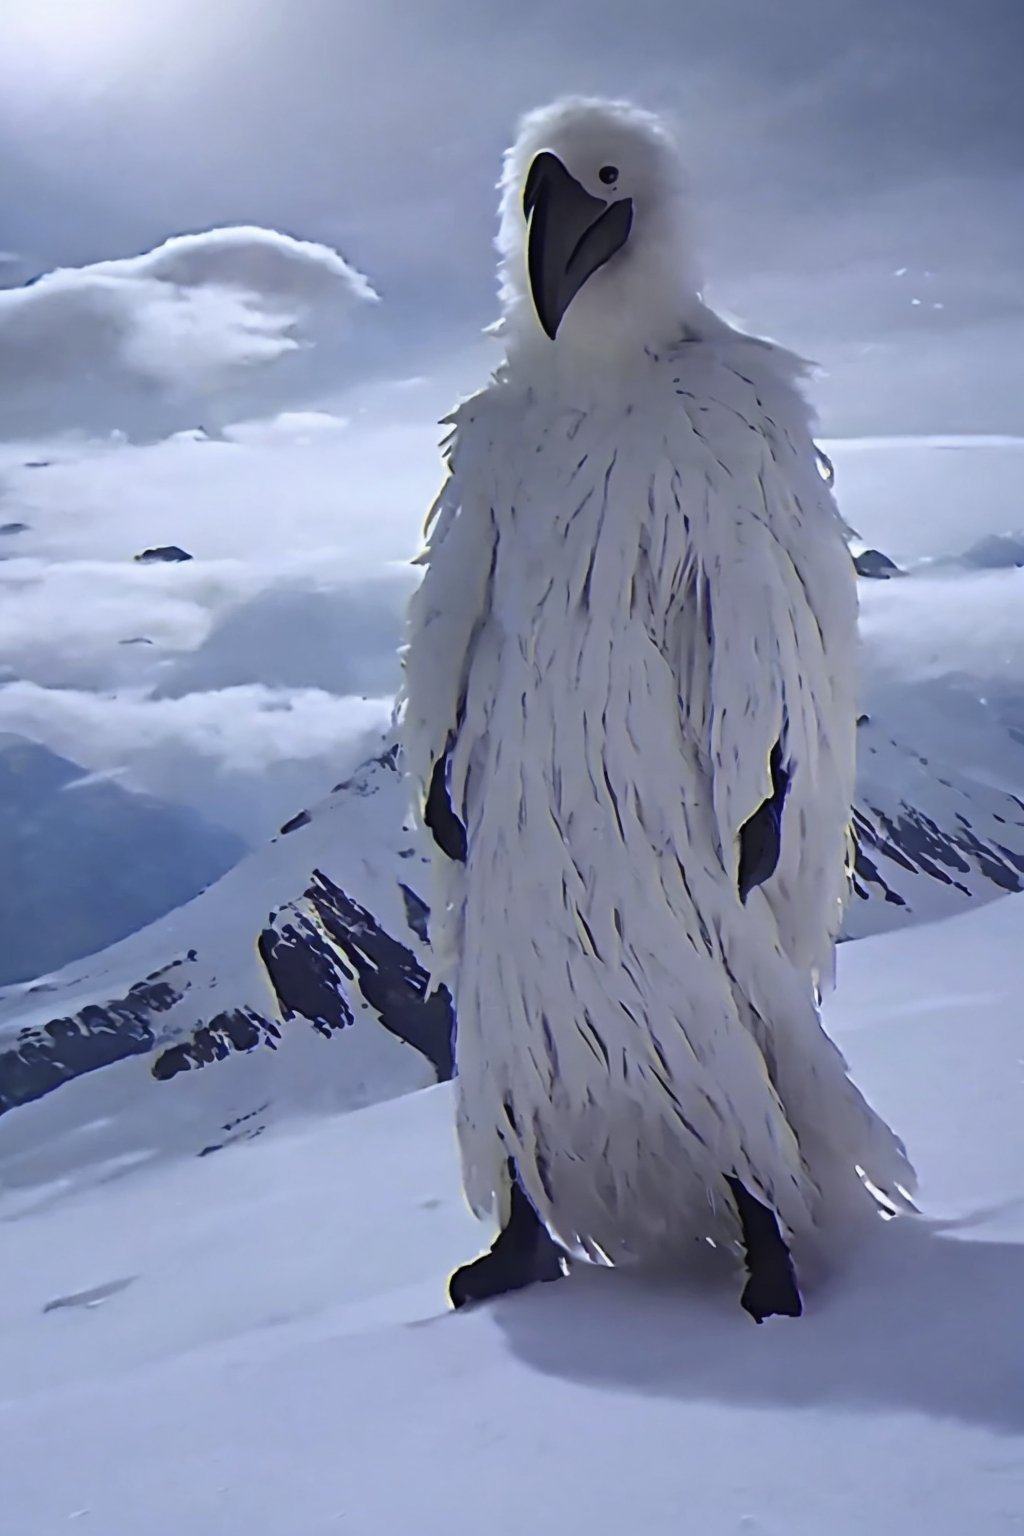 Opium bird, standing, feathers, white feathers, bird, birdman, humanoid, bird head, with extremely long beak, long beak, long mouth, stylized, thin, full body, bird legs, bird arms, sinister, terrifying, beautiful

High quality, HD, 4kHD, cinematic, atmospheric, realistic, ultra-realistic
snow, mountain, cloudy, gray sky, dark clouds
More Detail,lora:largebulg1-000012:1,AIDA_NH_humans